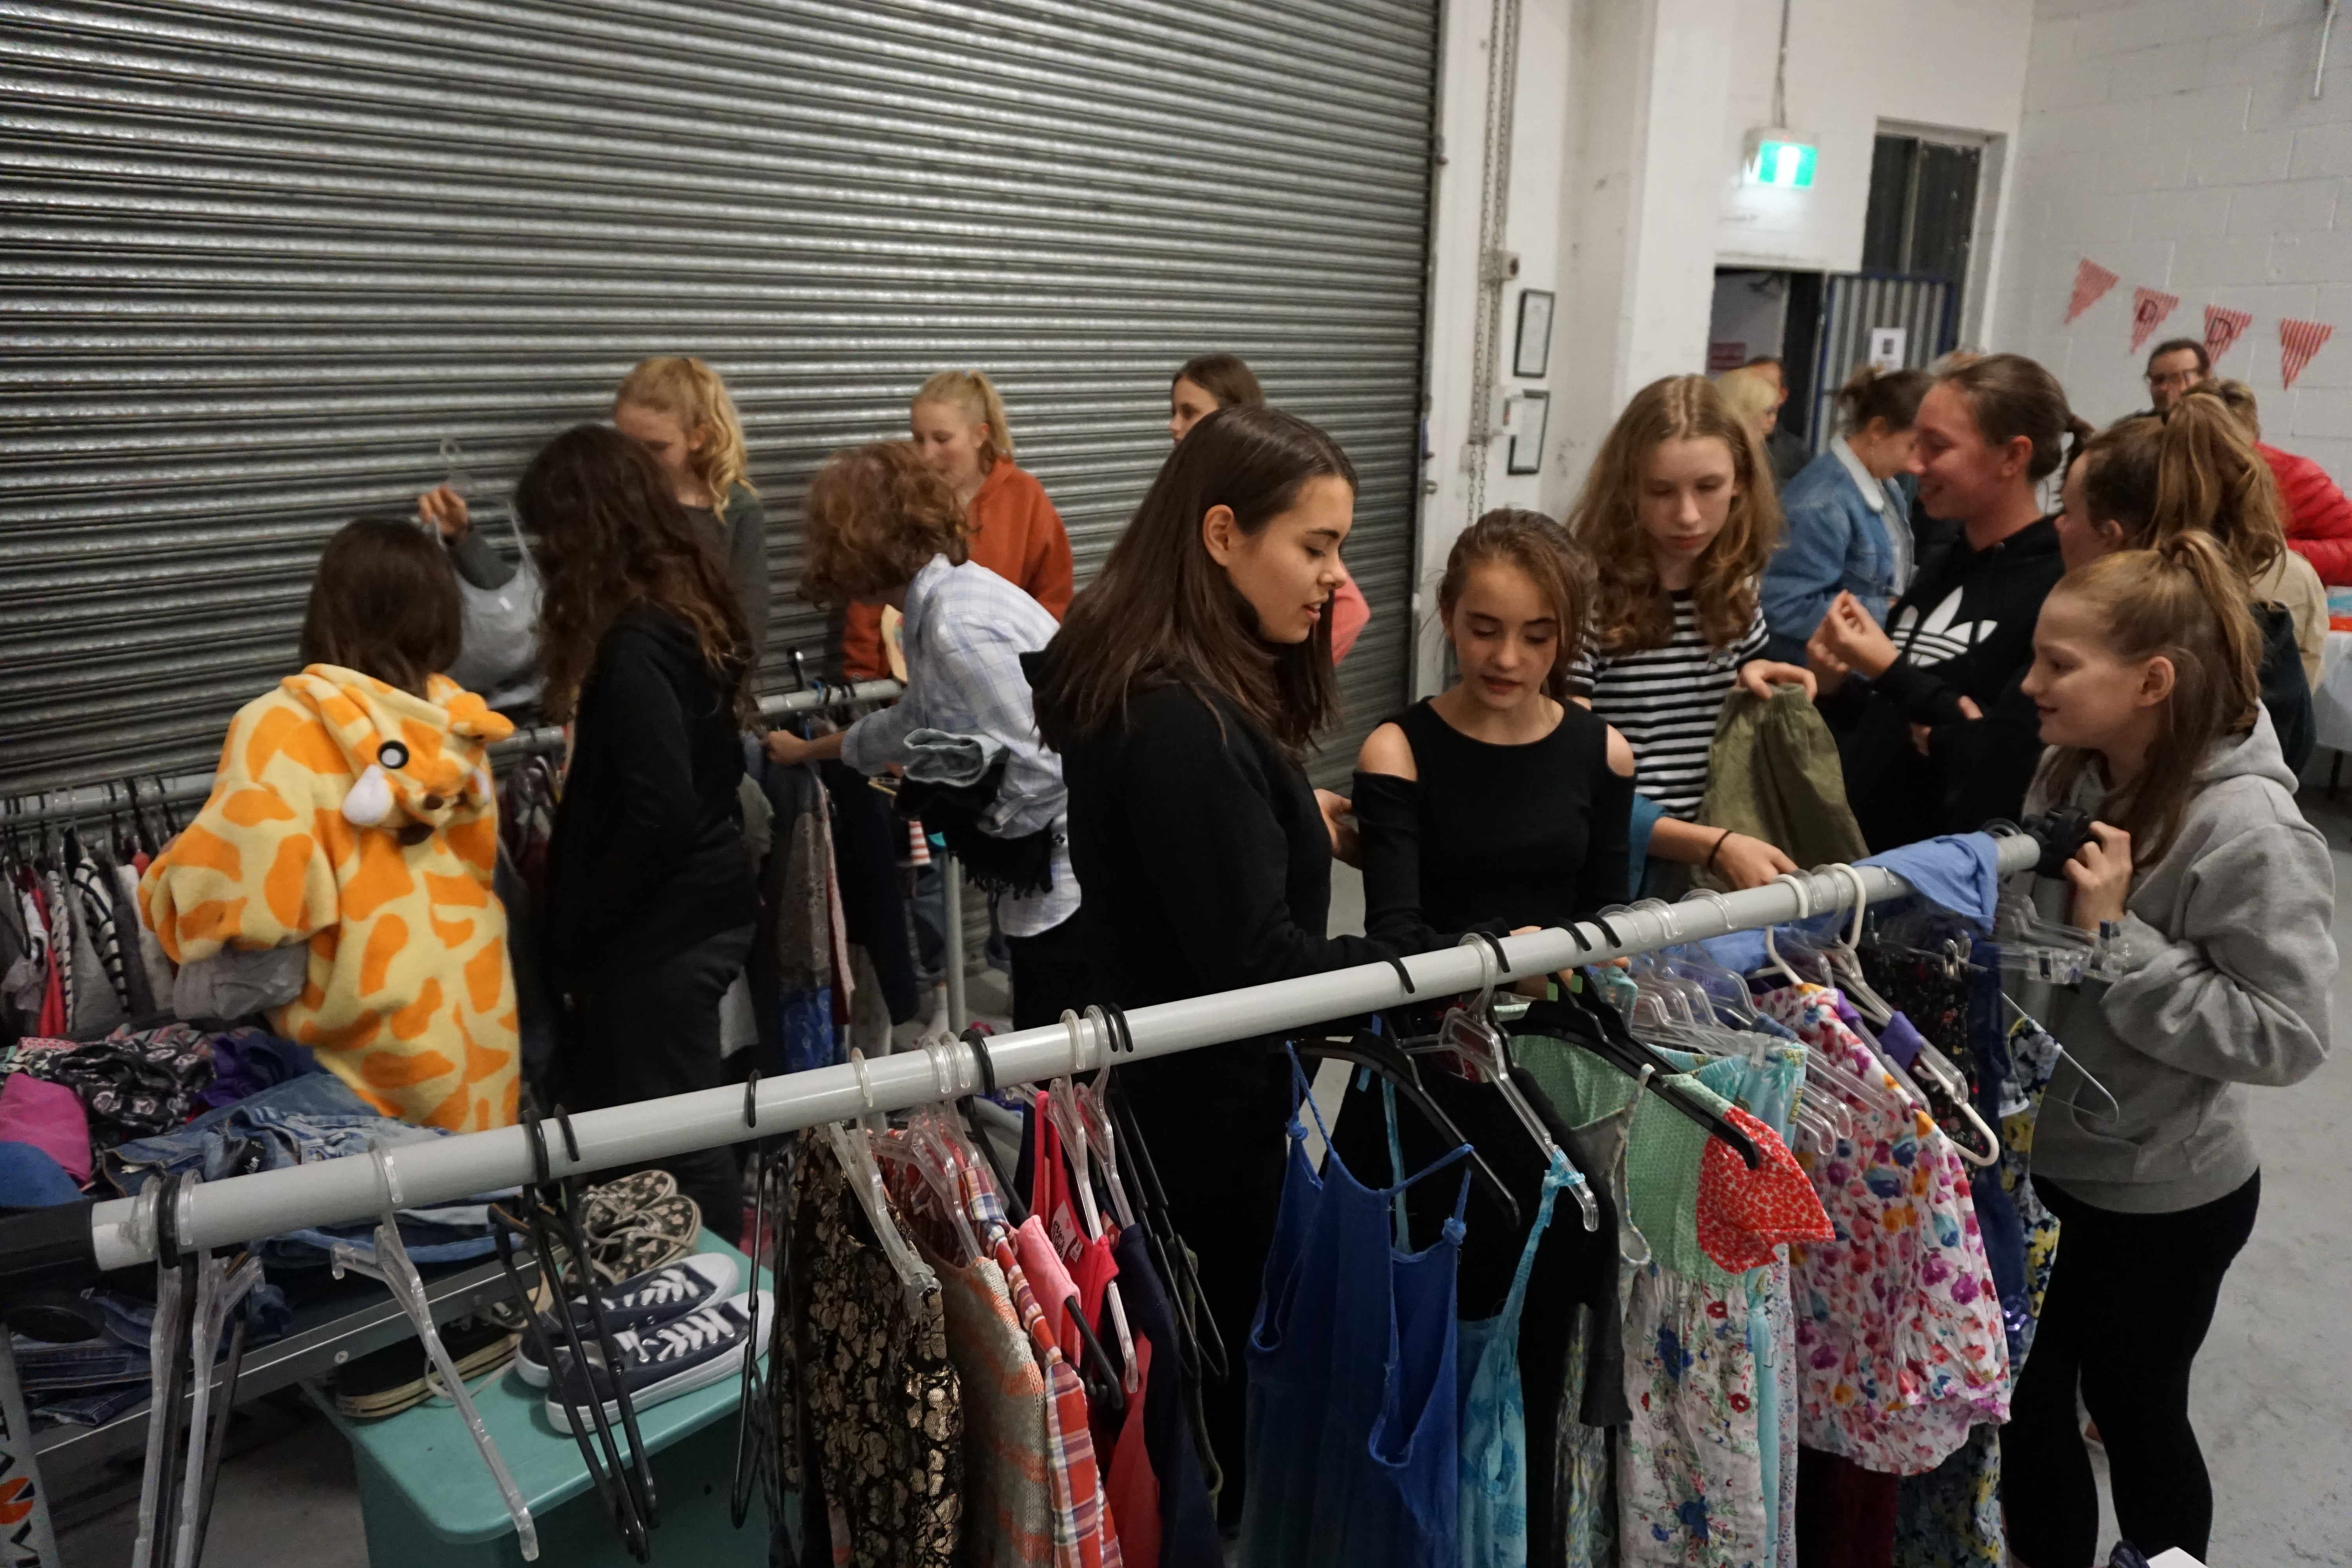 The Dance Domain clothes swap shop in action!